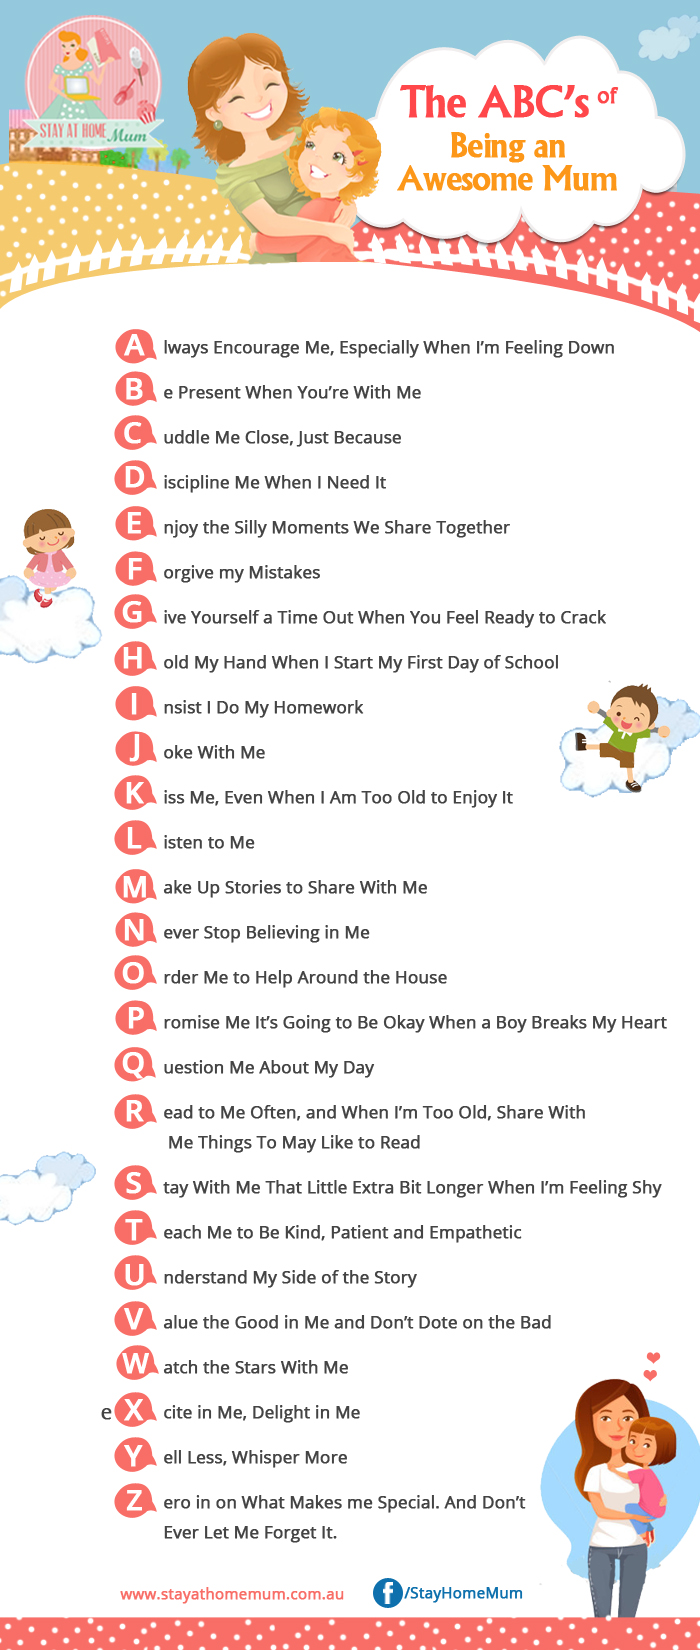 ABC's of Being an Awesome Mum - Stay at Home Mum